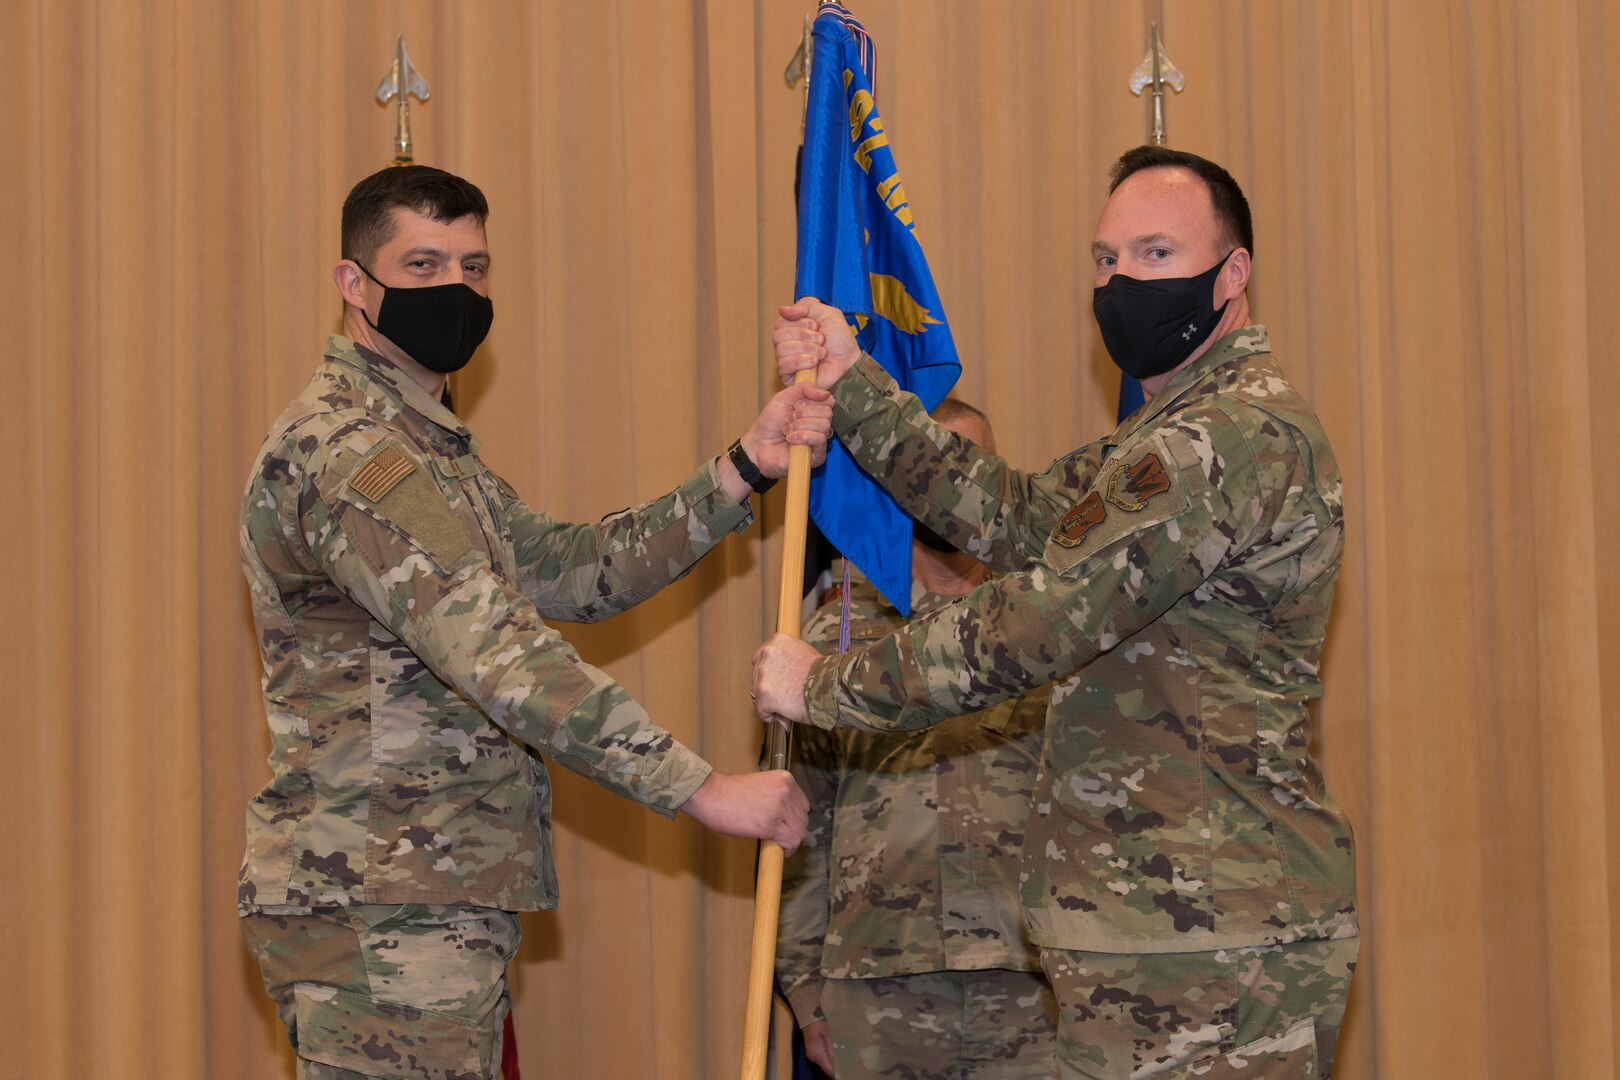 Two Airmen hold a flag during a military change of command ceremony